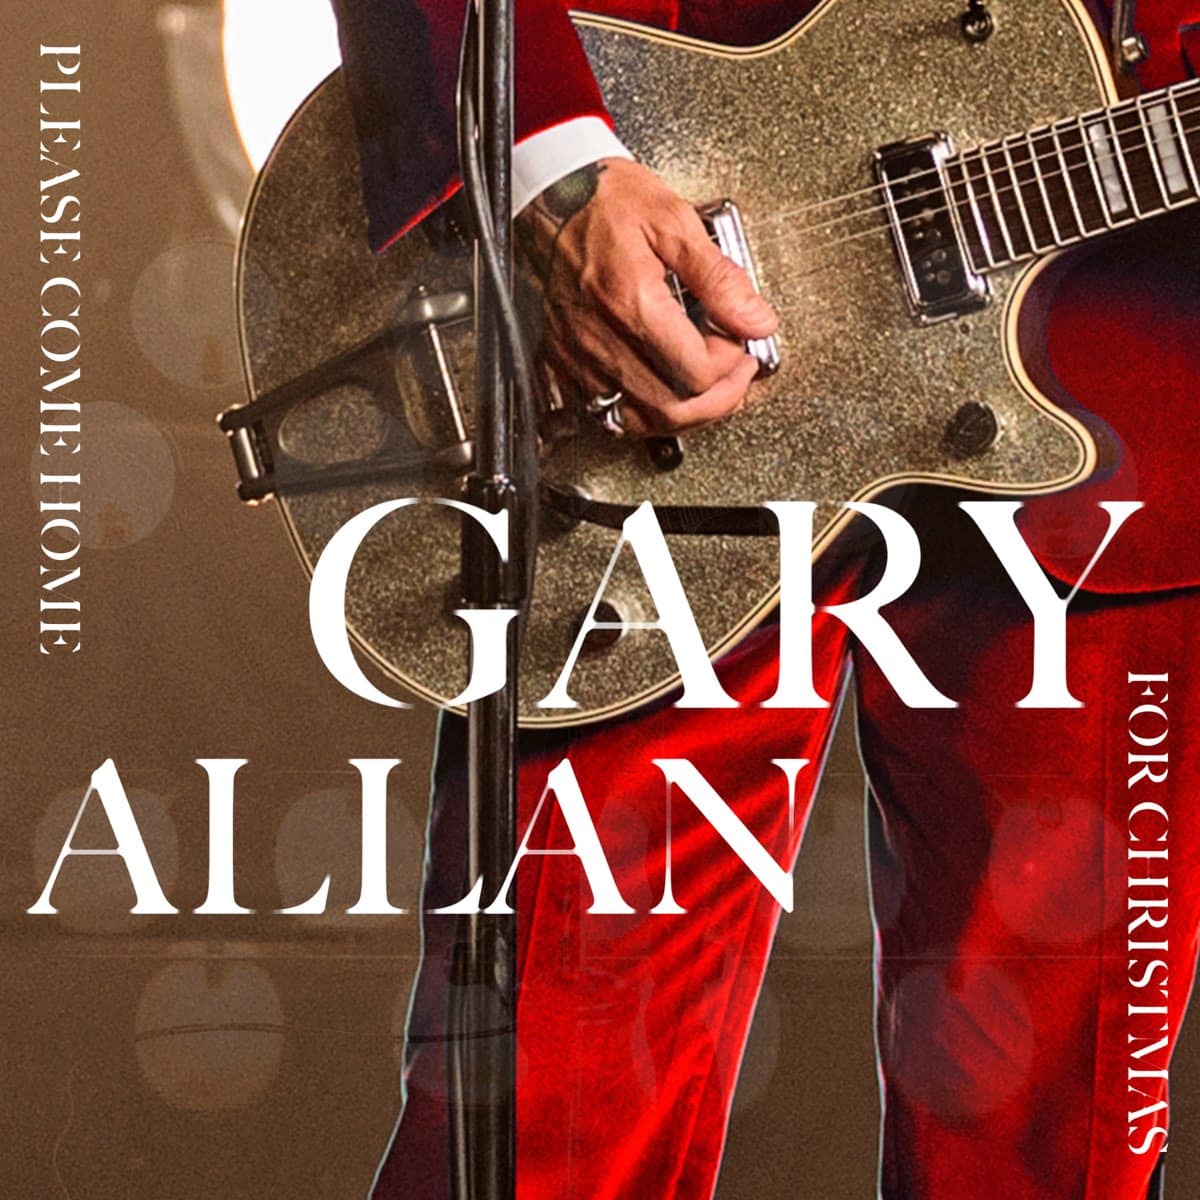 The cover art for the Gary Allan album Please Come Home for Christmas